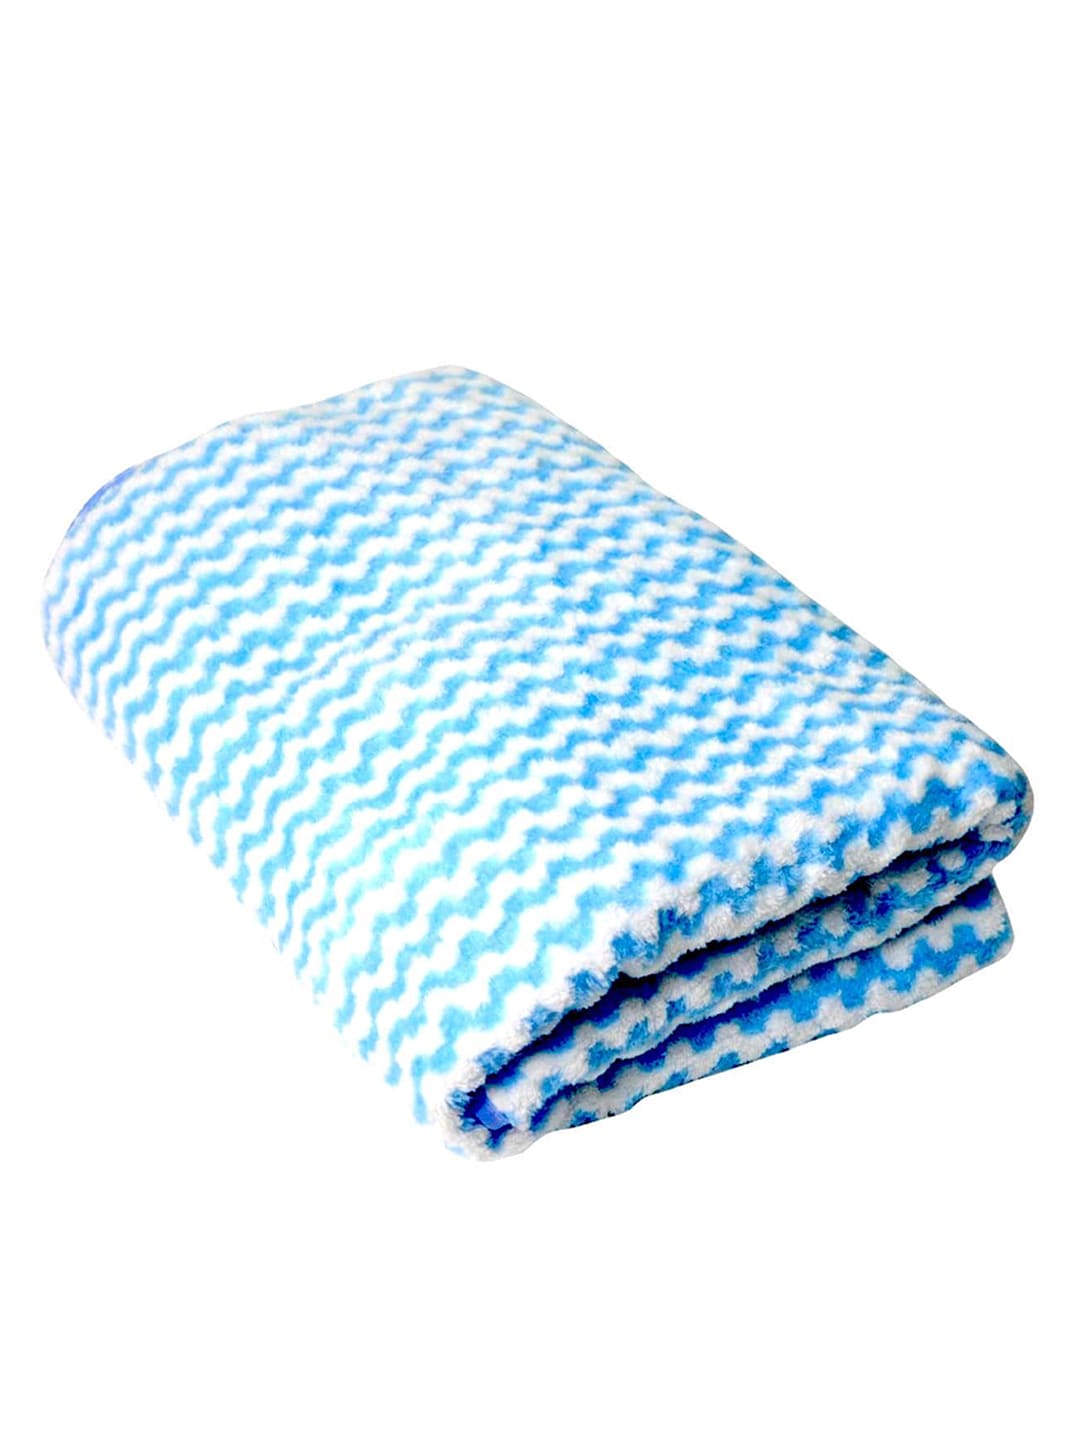 Tranquil square Sky-Blue & White Striped 650 GSM Cotton Bath Towel Price in India